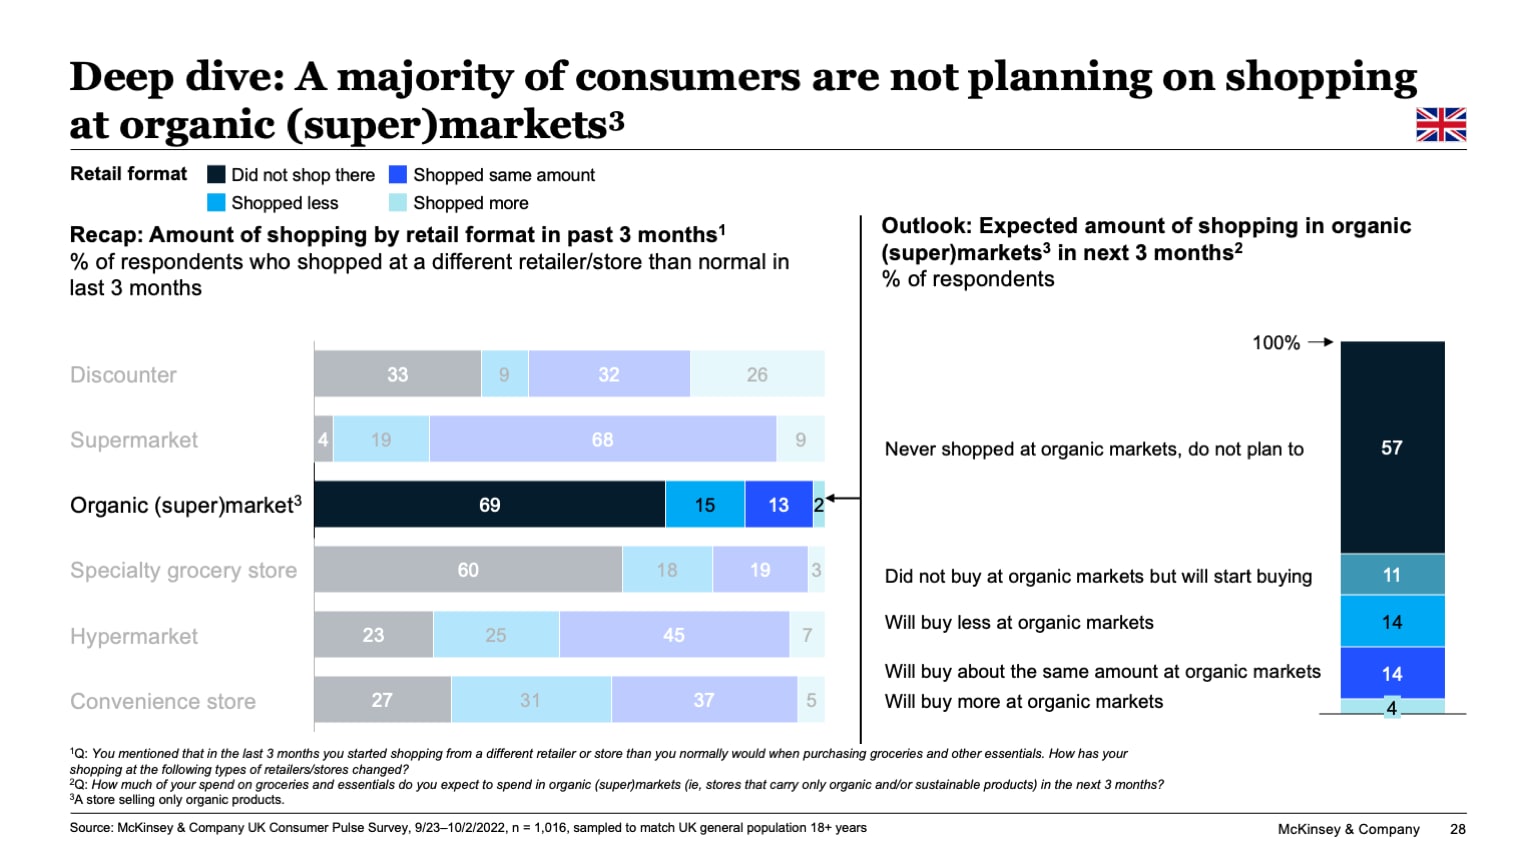 Deep dive: A majority of consumers are not planning on shopping at organic (super)markets